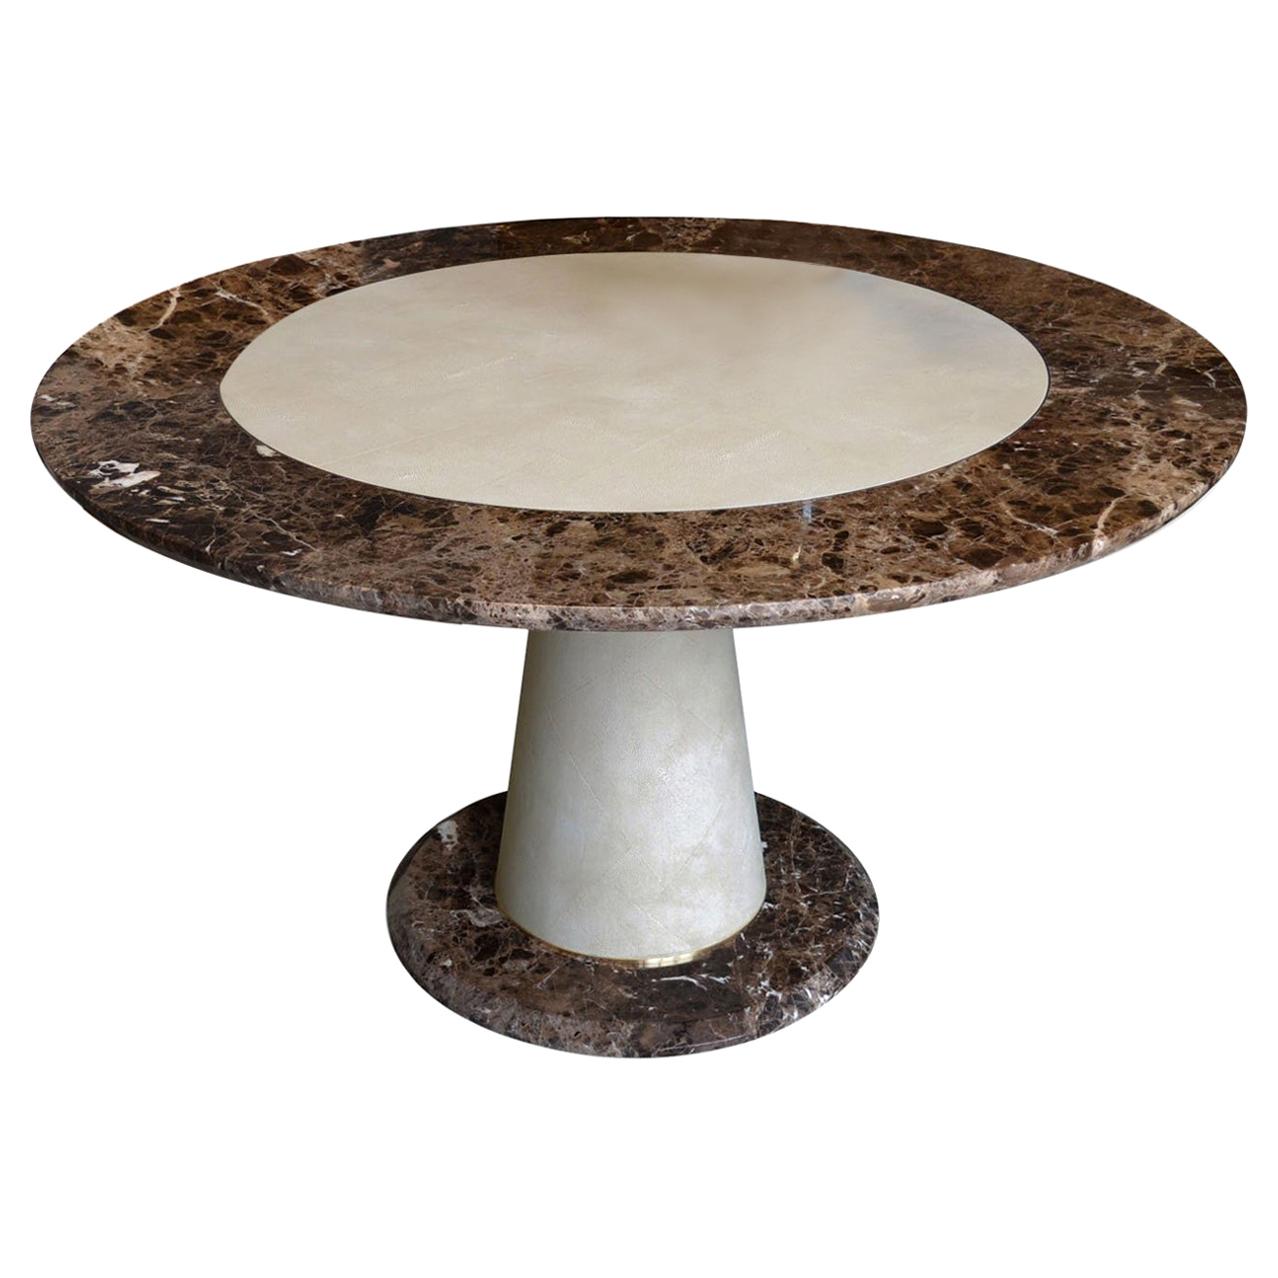 Dining Table round brown marble scagliola shagreen decor handmade in Italy